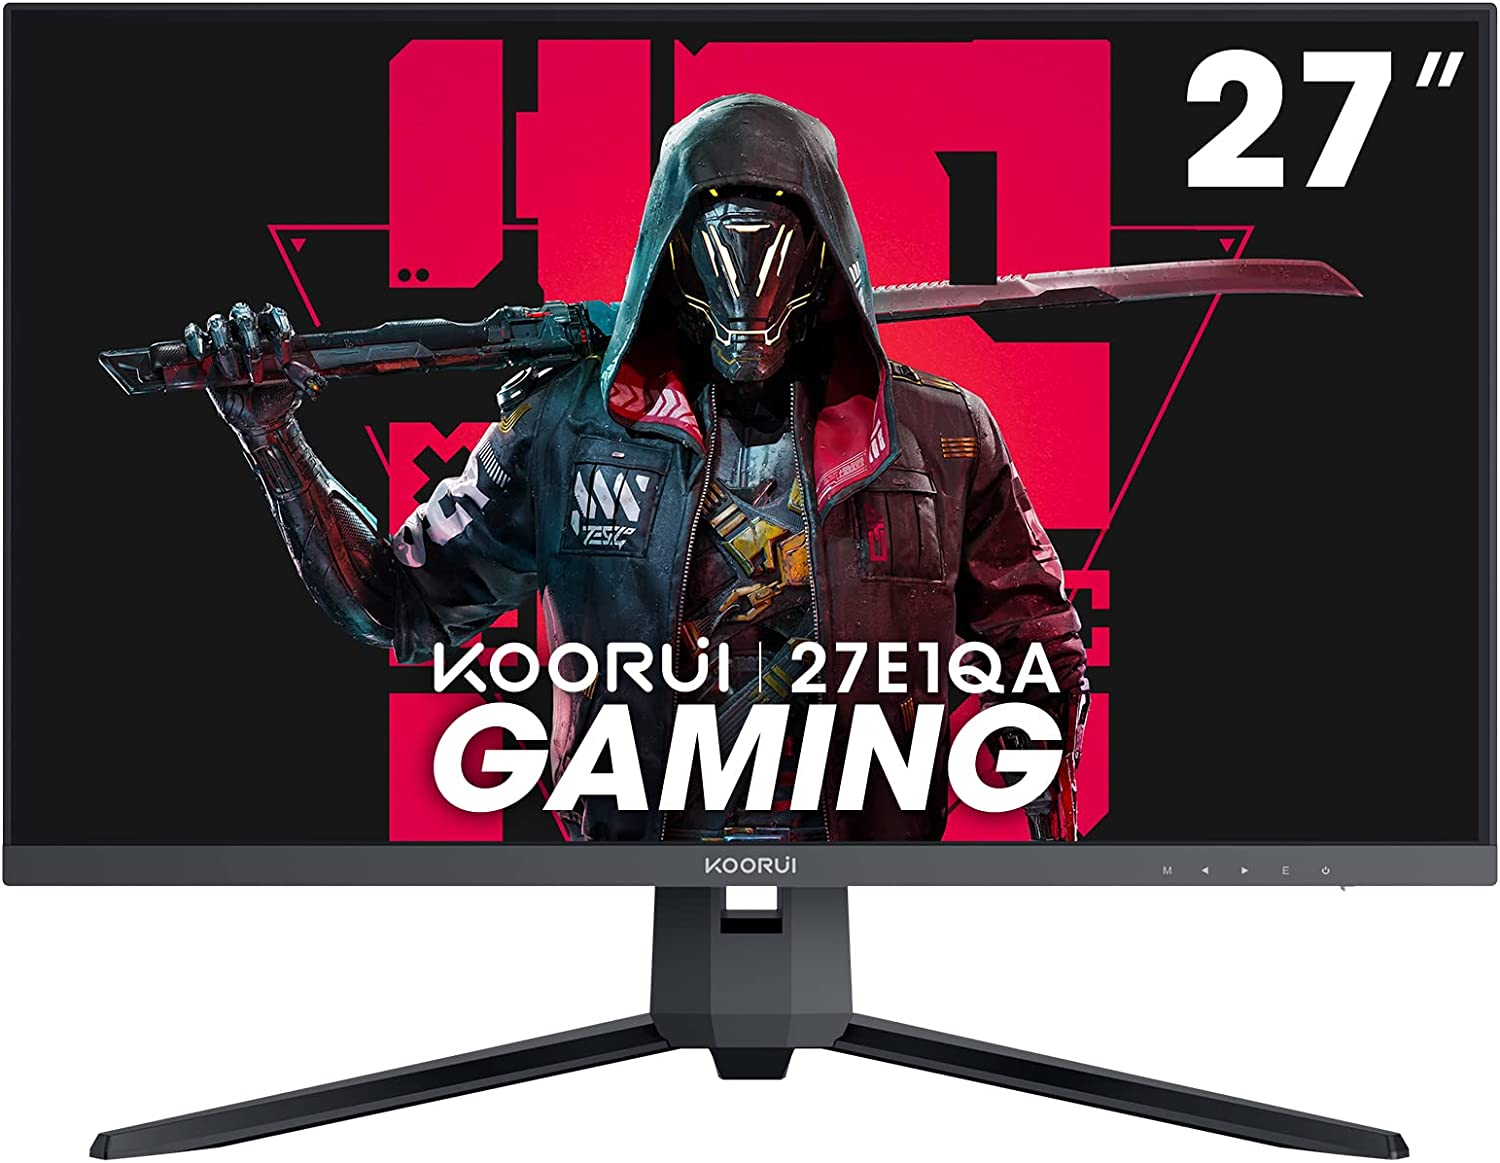 1440p monitor review